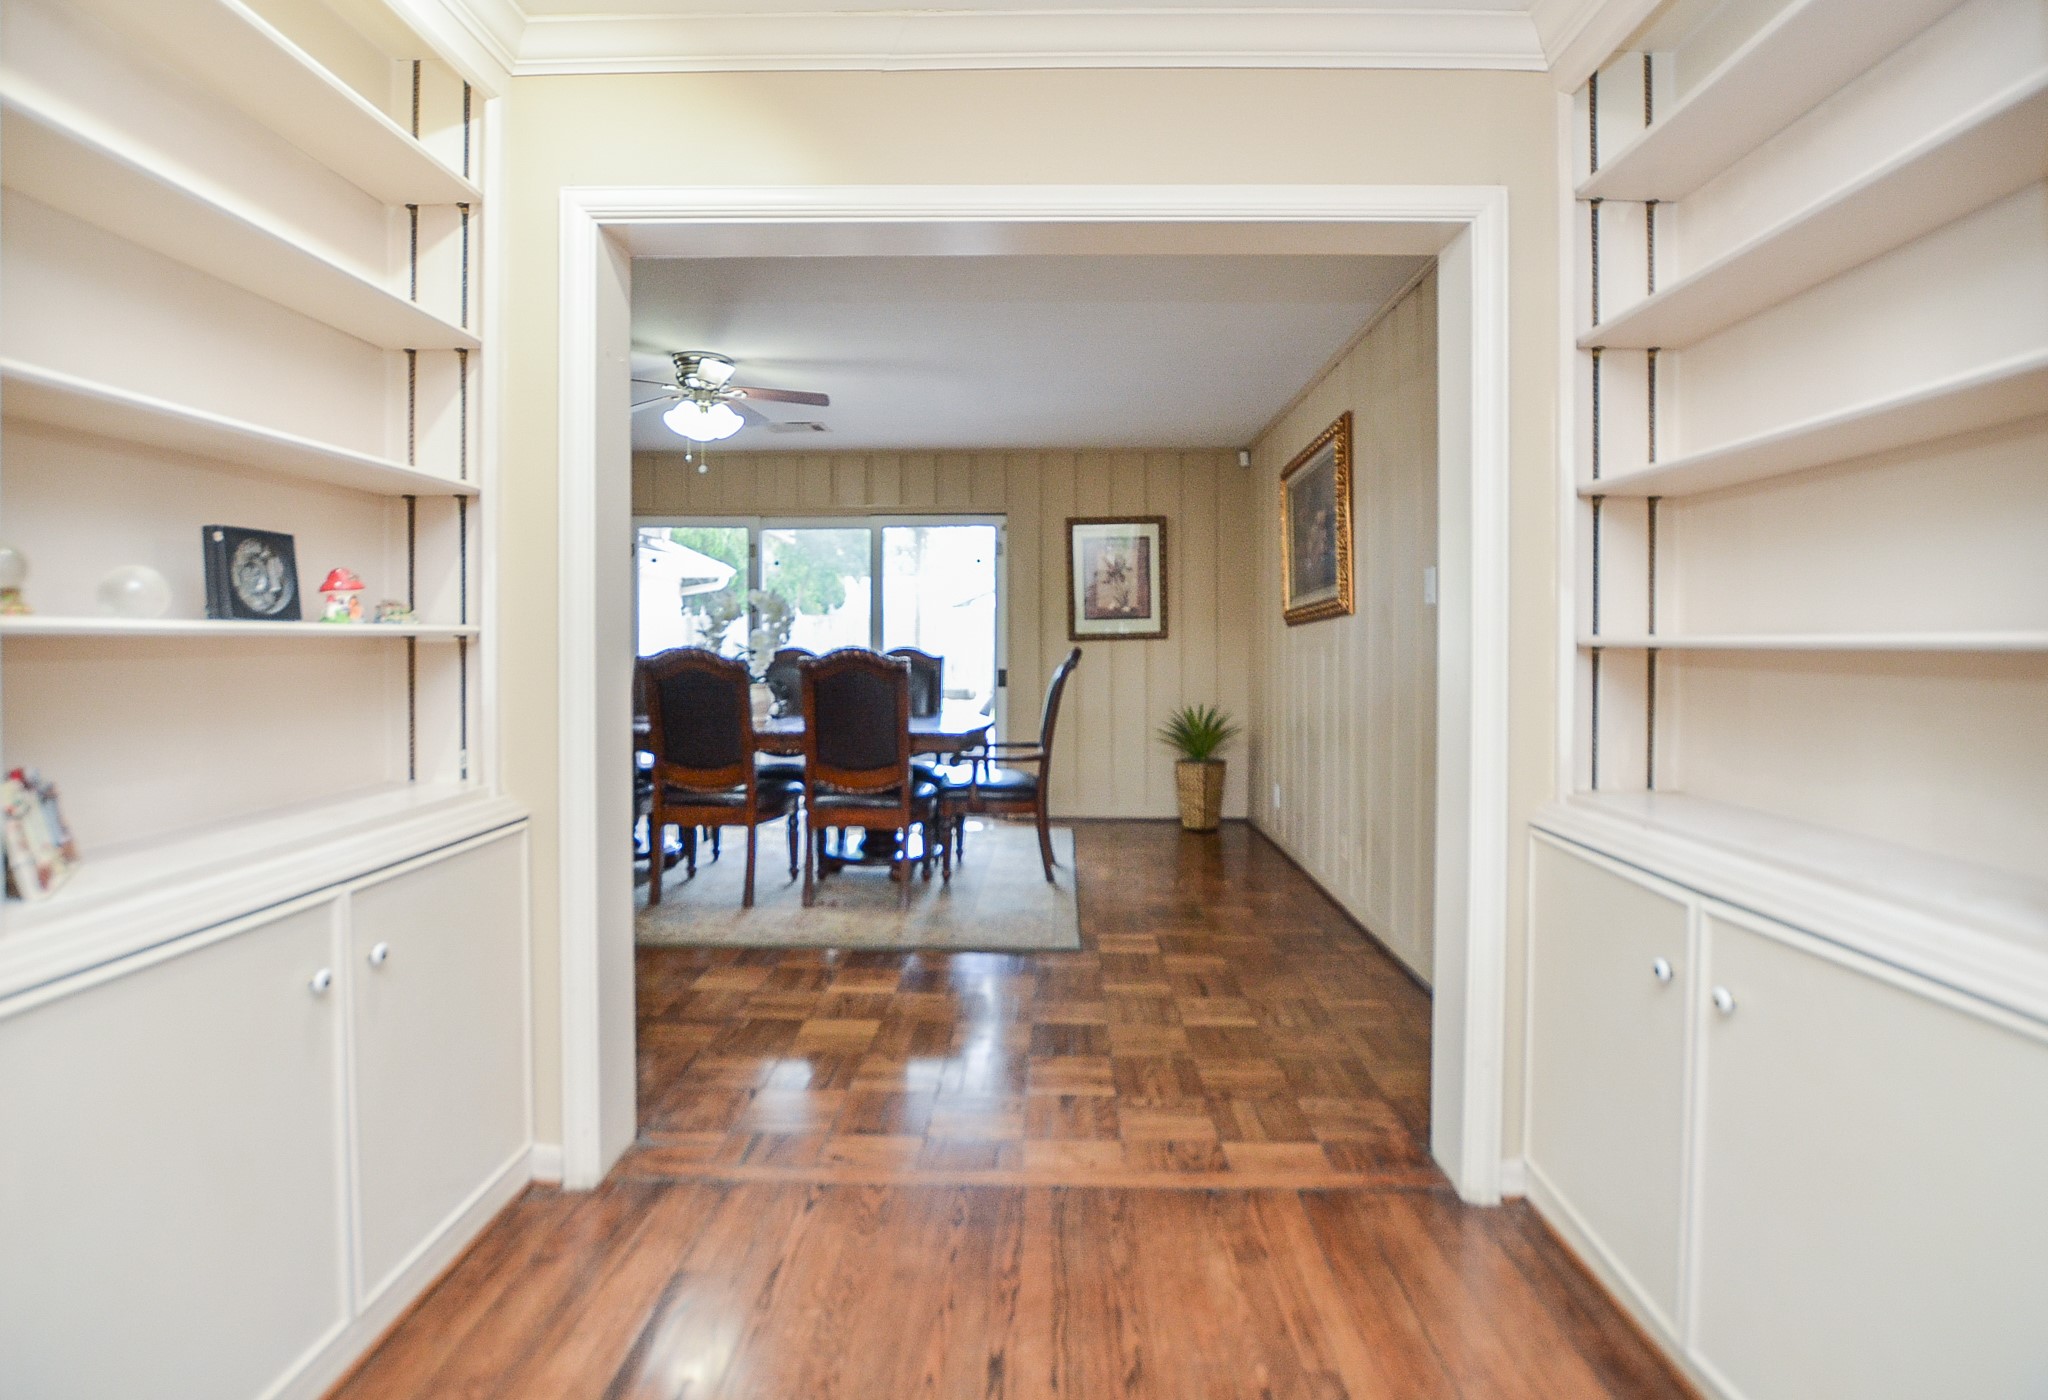 What a lovely sight! Built-in wall storage on opposite sides of this hardwood floor path, just off the formal dining area.